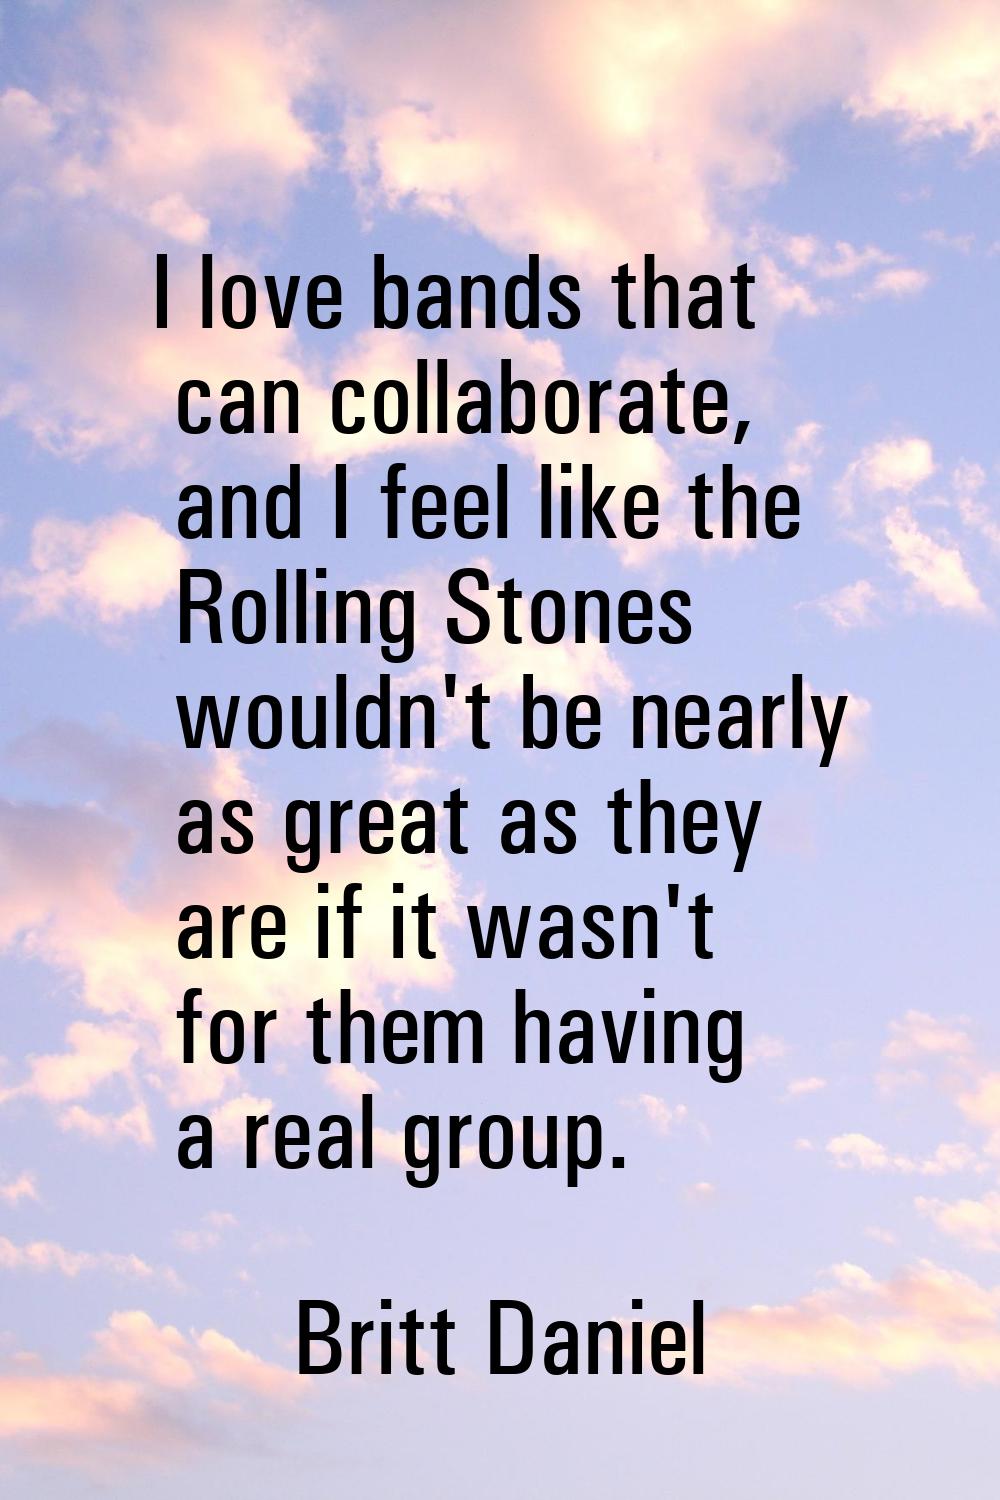 I love bands that can collaborate, and I feel like the Rolling Stones wouldn't be nearly as great a